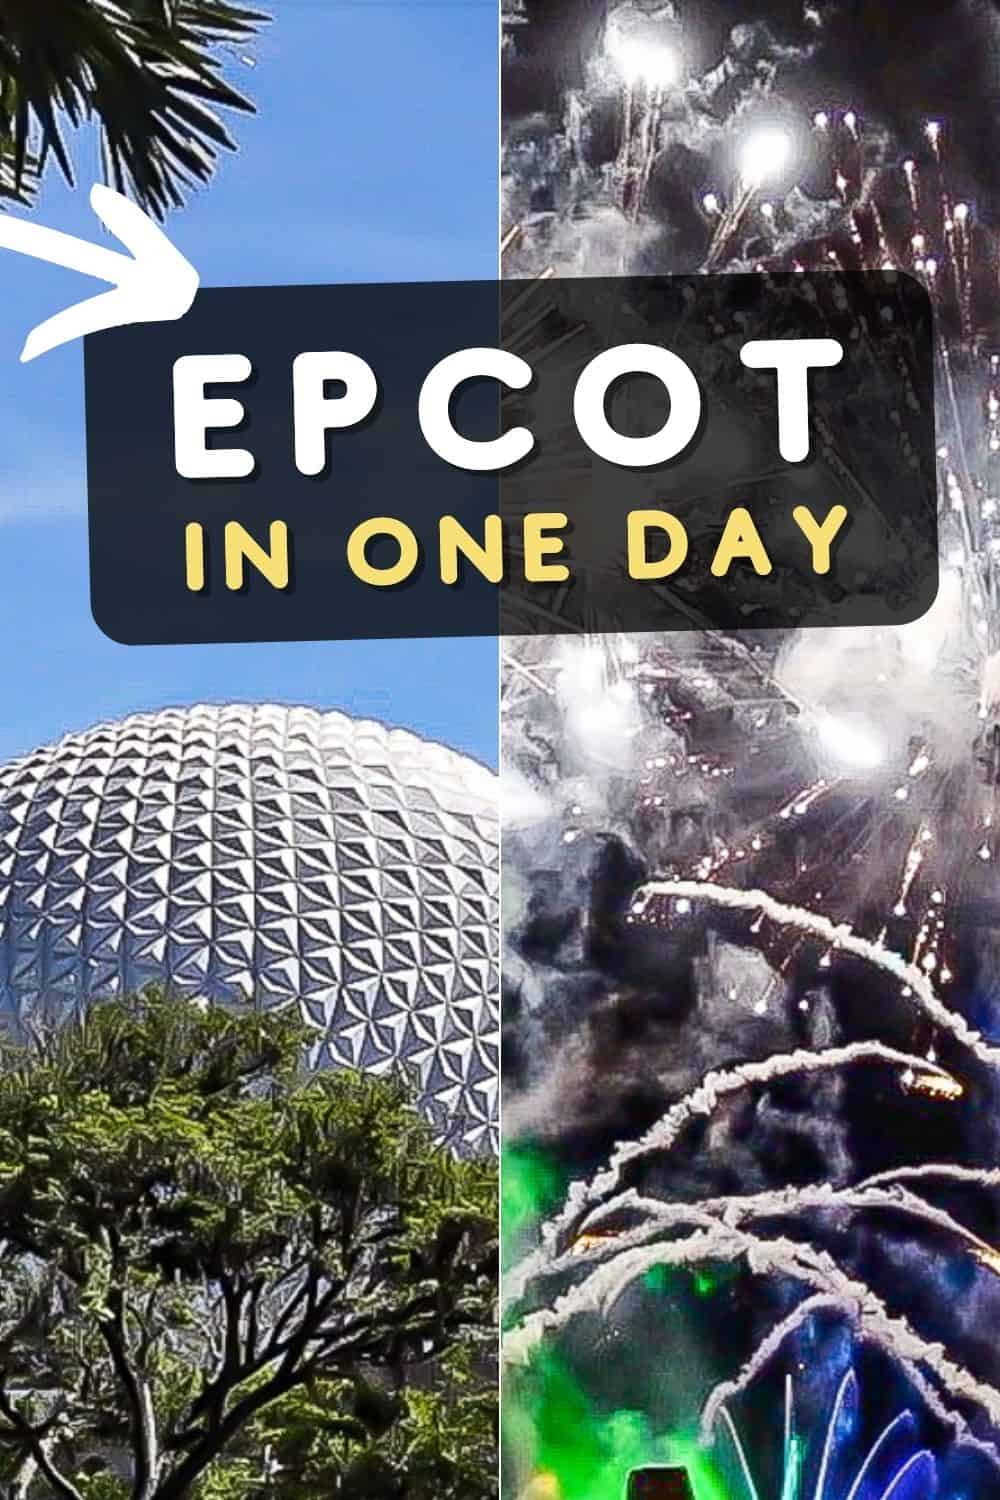 Epcot Ball and Fireworks